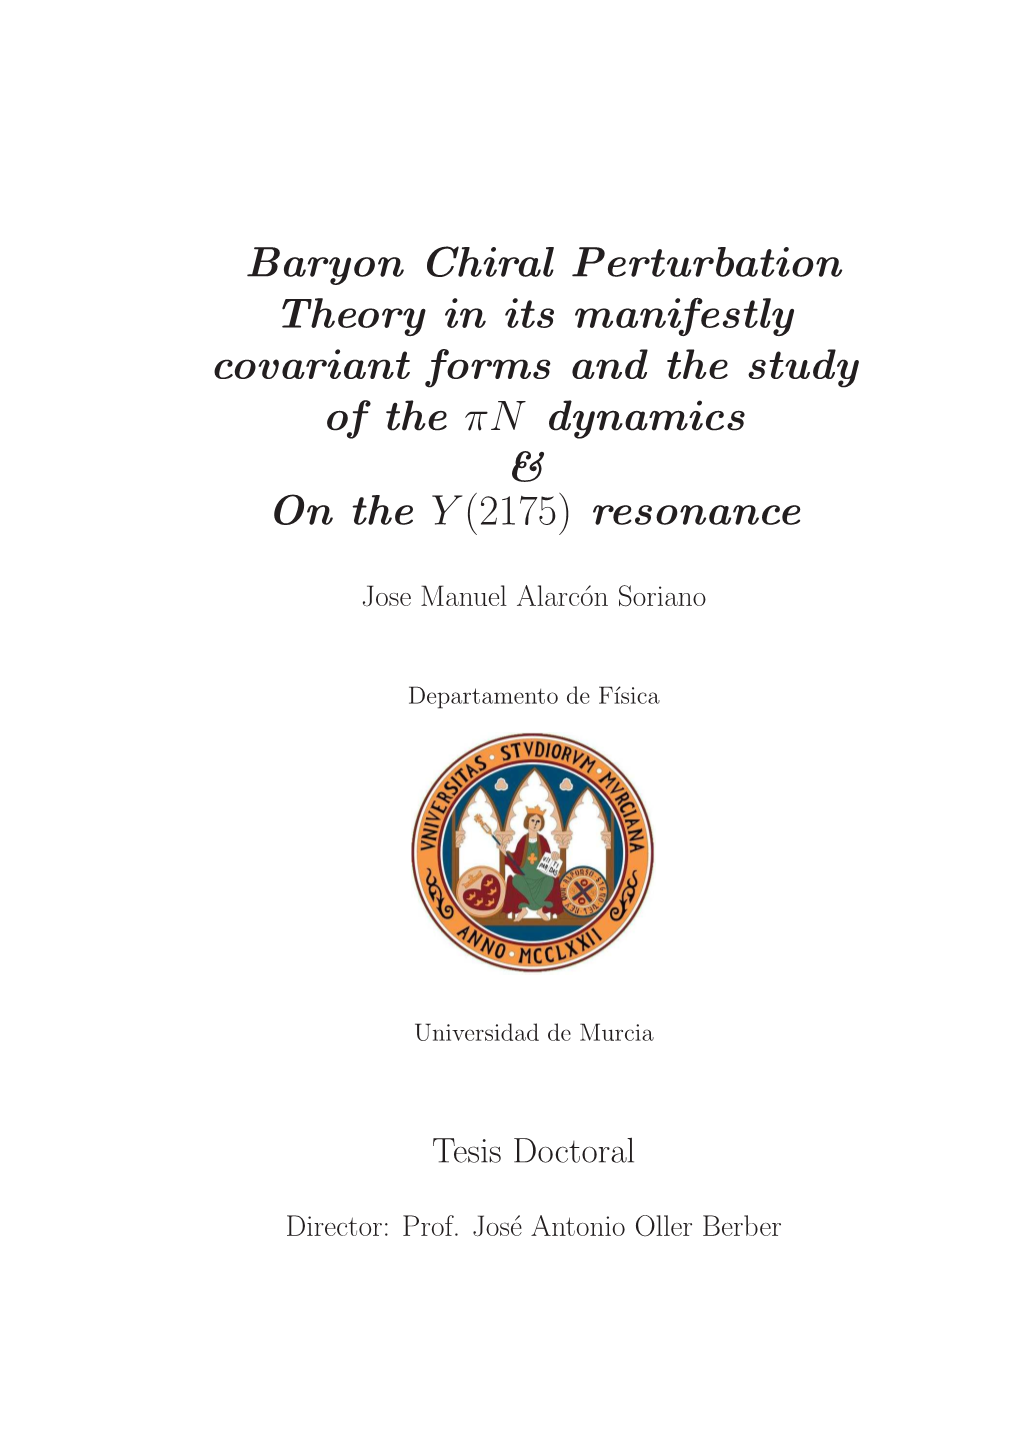 Baryon Chiral Perturbation Theory in Its Manifestly Covariant Forms and the Study of the Πn Dynamics & on the Y (2175) Resonance